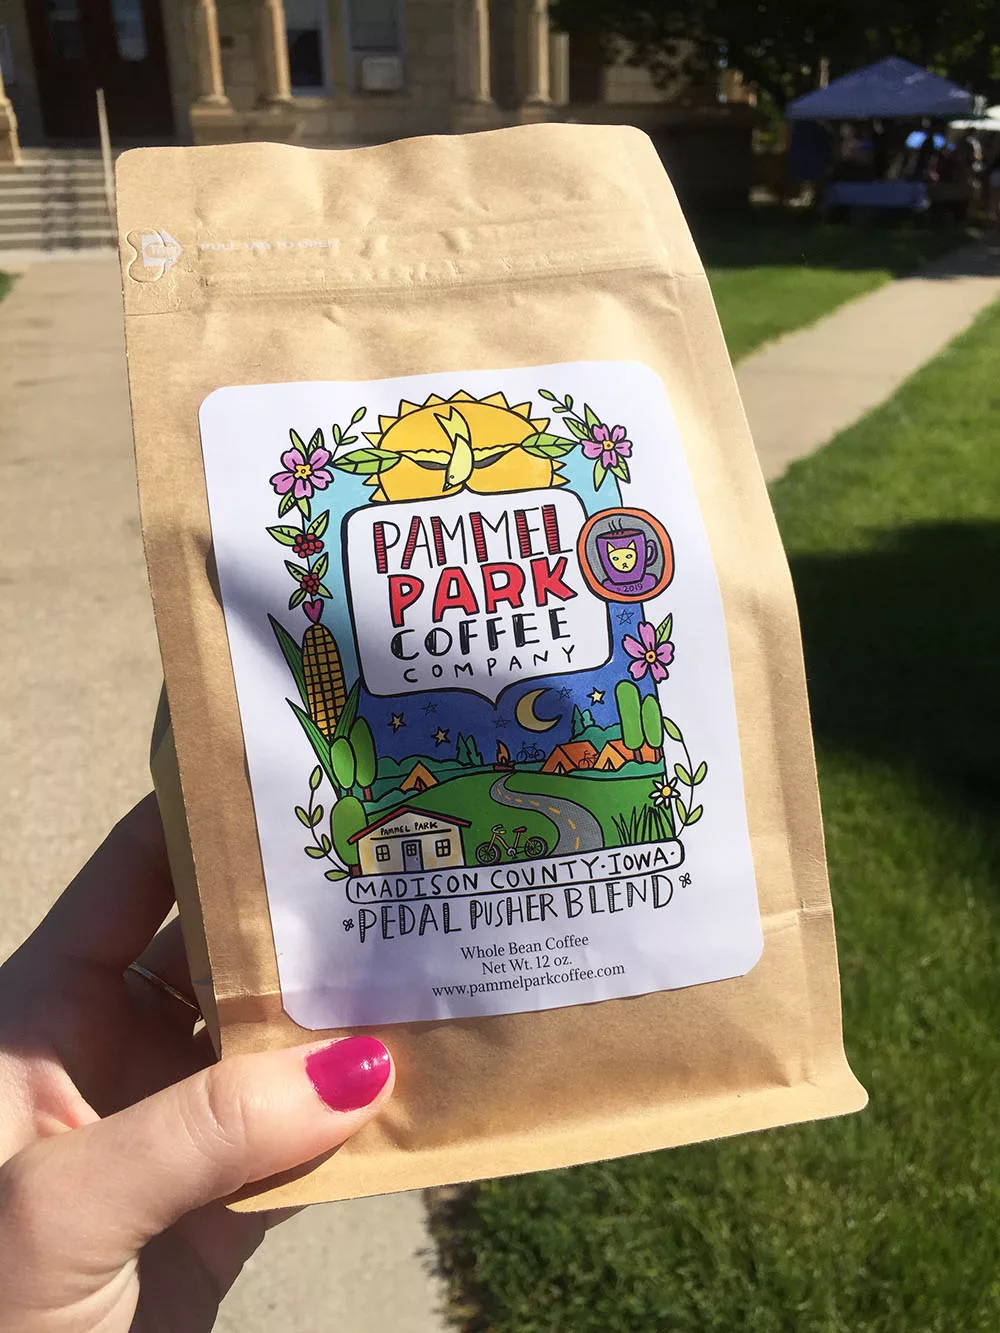 Bag of coffee beans from Pammel Park Coffee with colorful illustrated label at the Winterset Farmers' Market in Winterset, Iowa